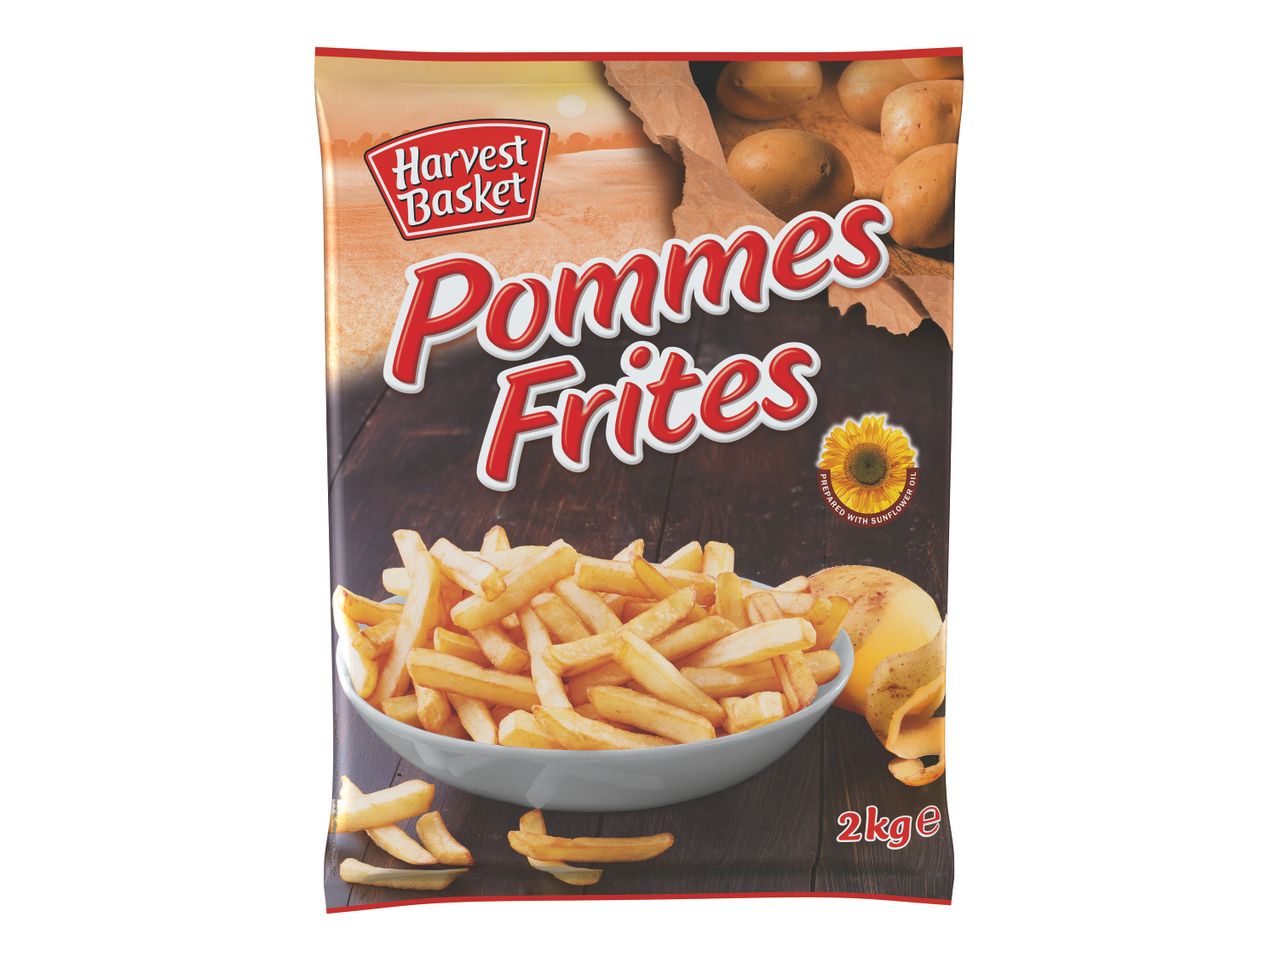 Go to full screen view: Oven Chips - Image 1